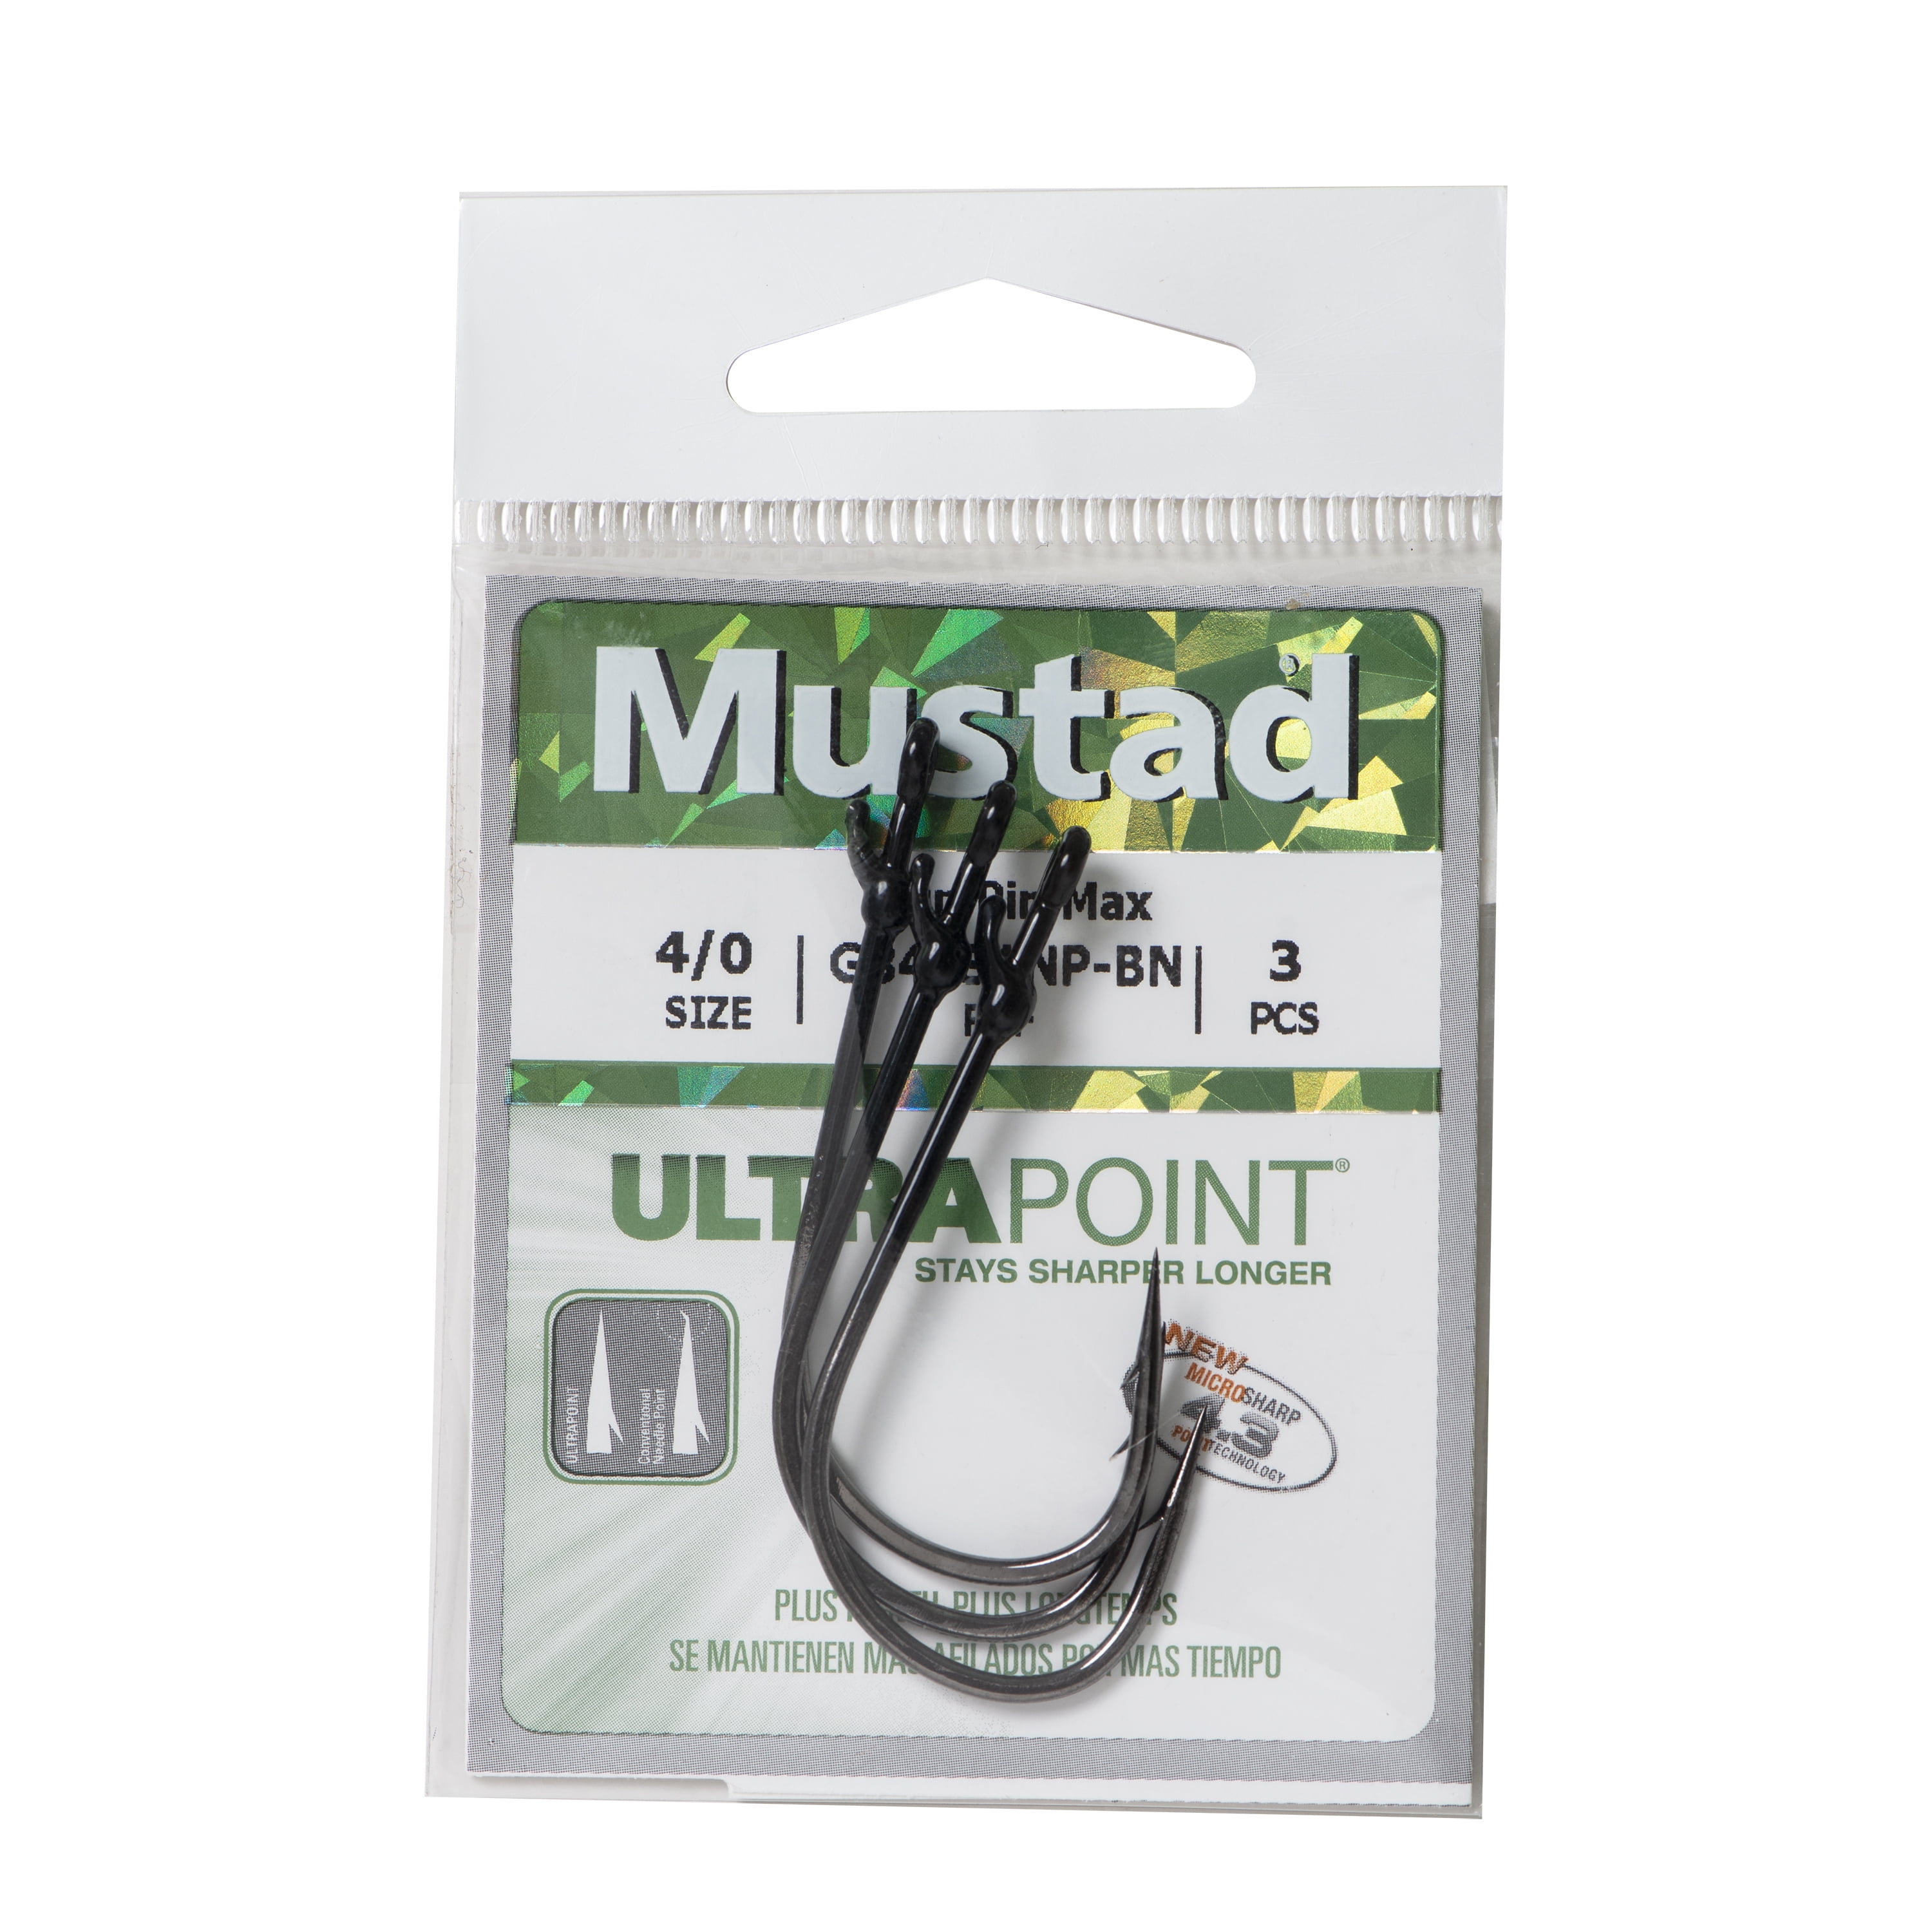 Mustad Grip Pin Max 3x Hook Review - Wired2Fish